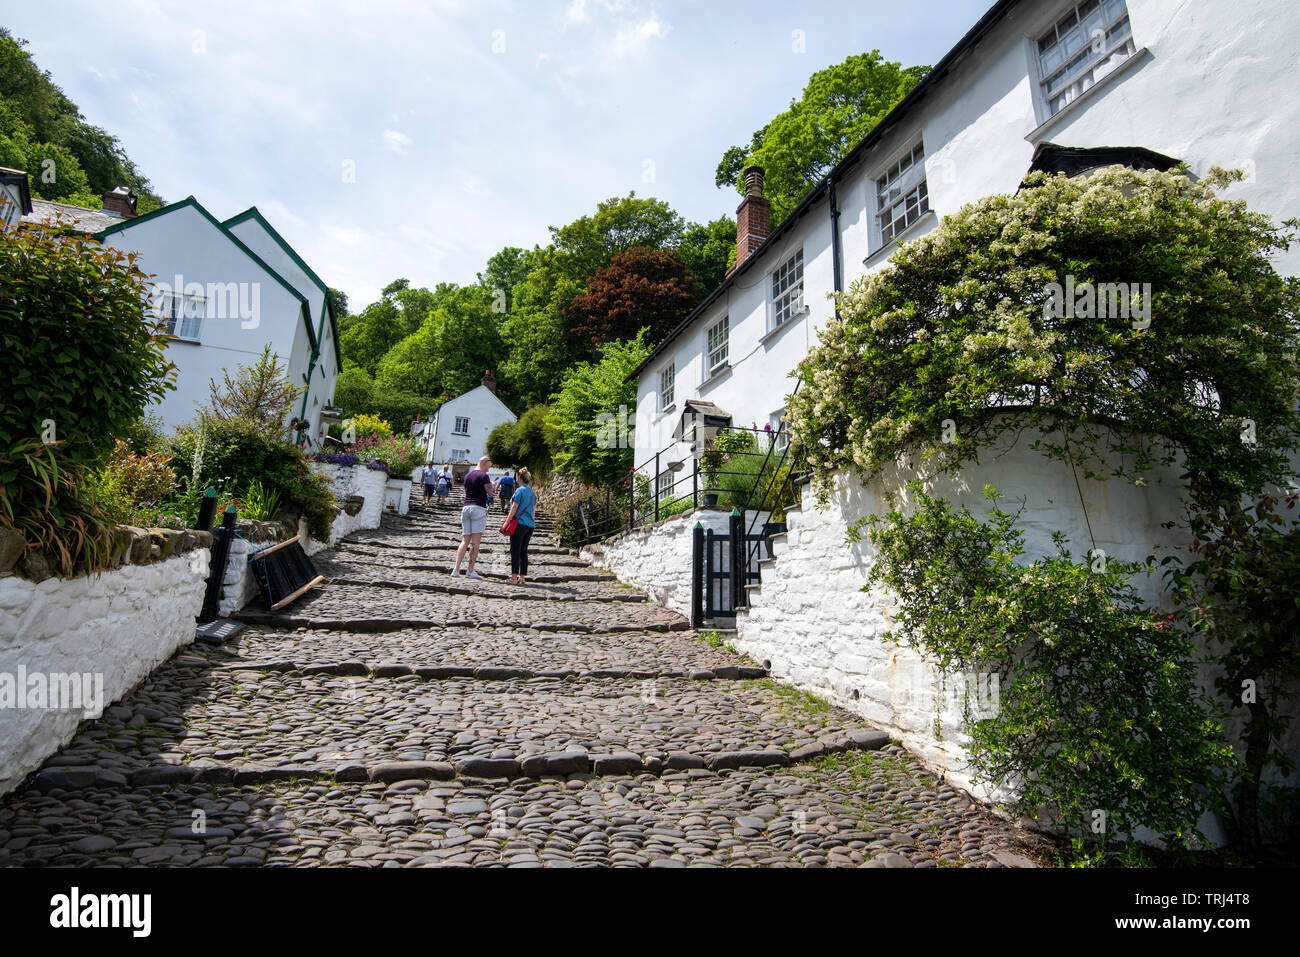 The steep climb up the cobbled streets of Clovelly, Devon England UK Stock Photo